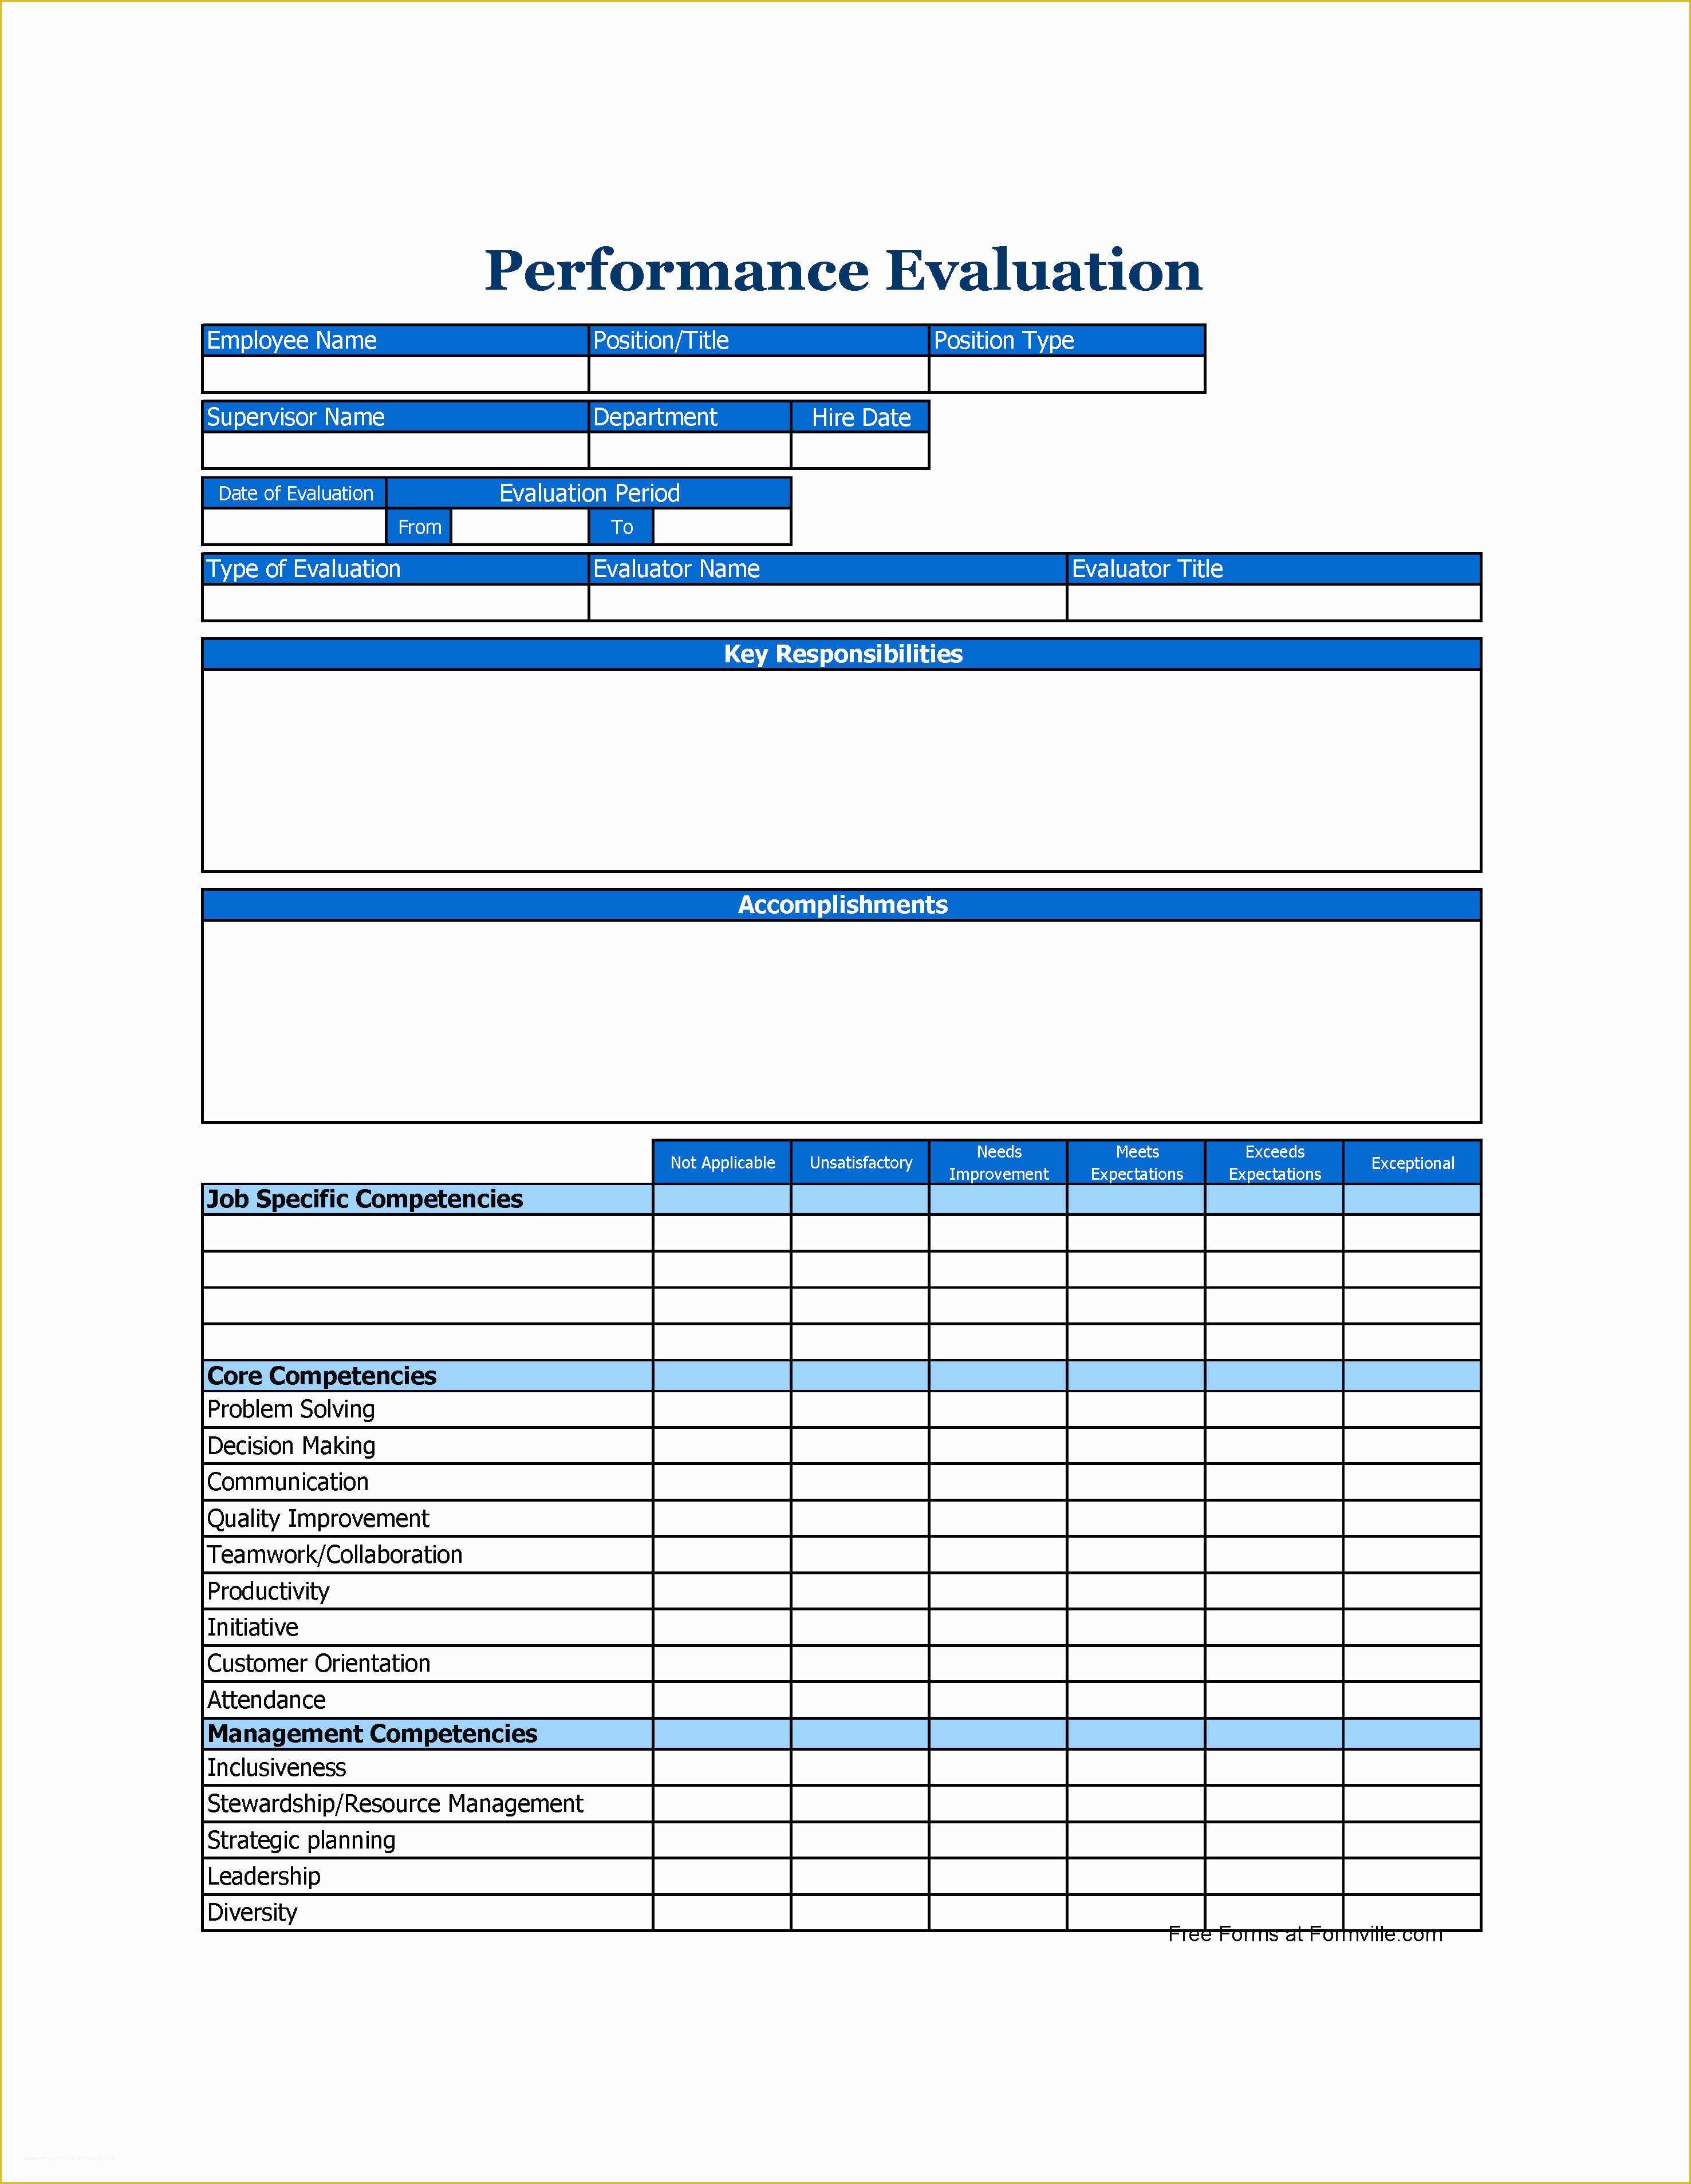 Free Performance Evaluation Templates Of 46 Employee Evaluation forms & Performance Review Examples